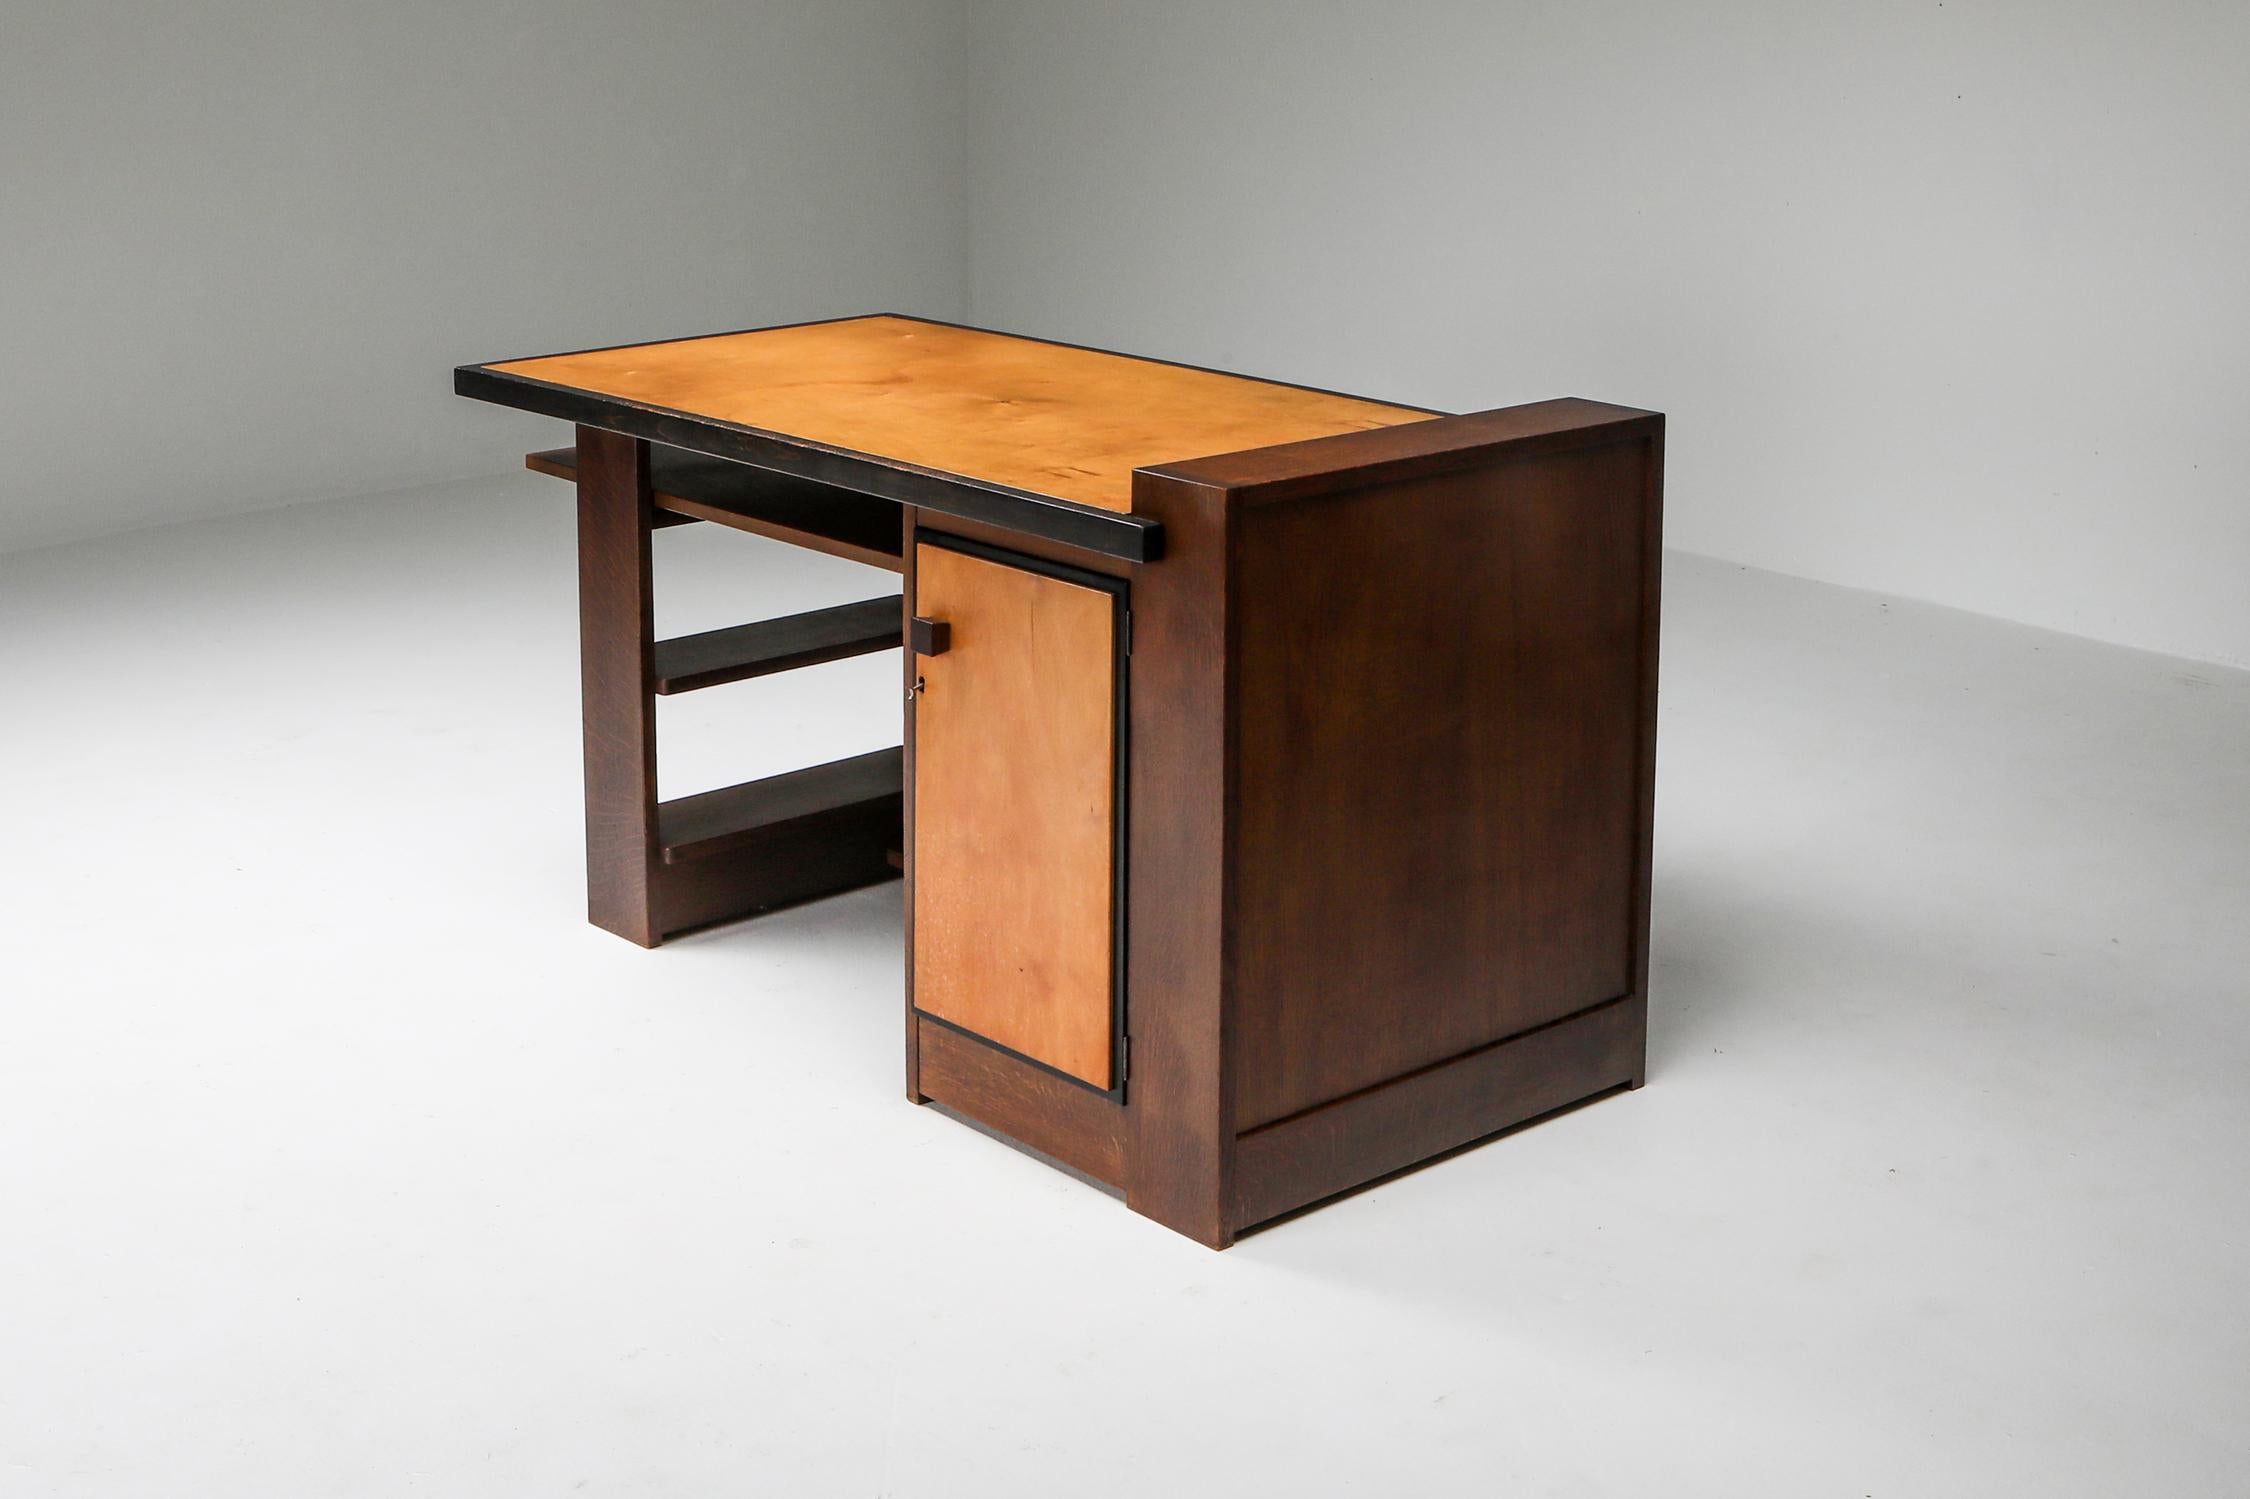 Mid-Century Modern Modernist Desk by Frits Spanjaard, Wouda Inspired, Netherlands, 1930s For Sale